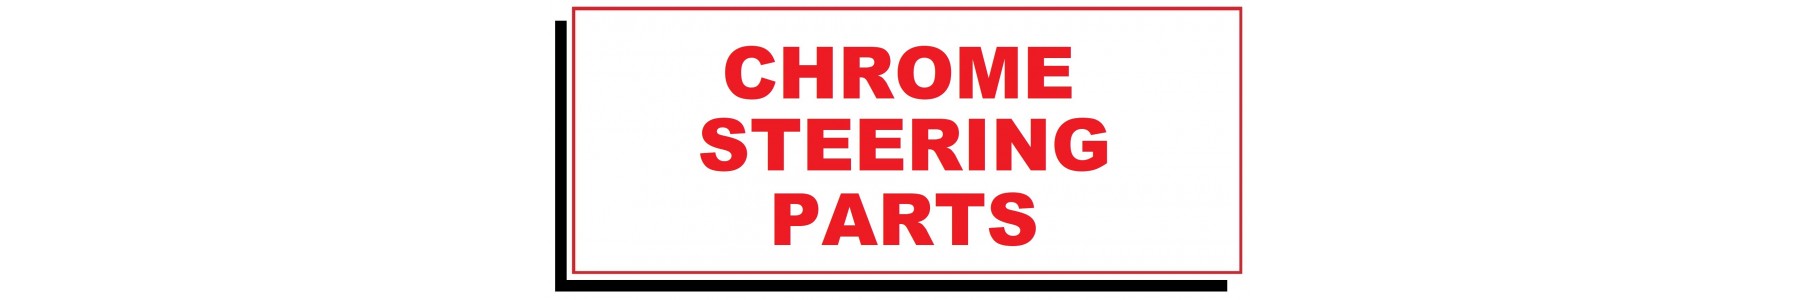 CHROME STEERING PARTS